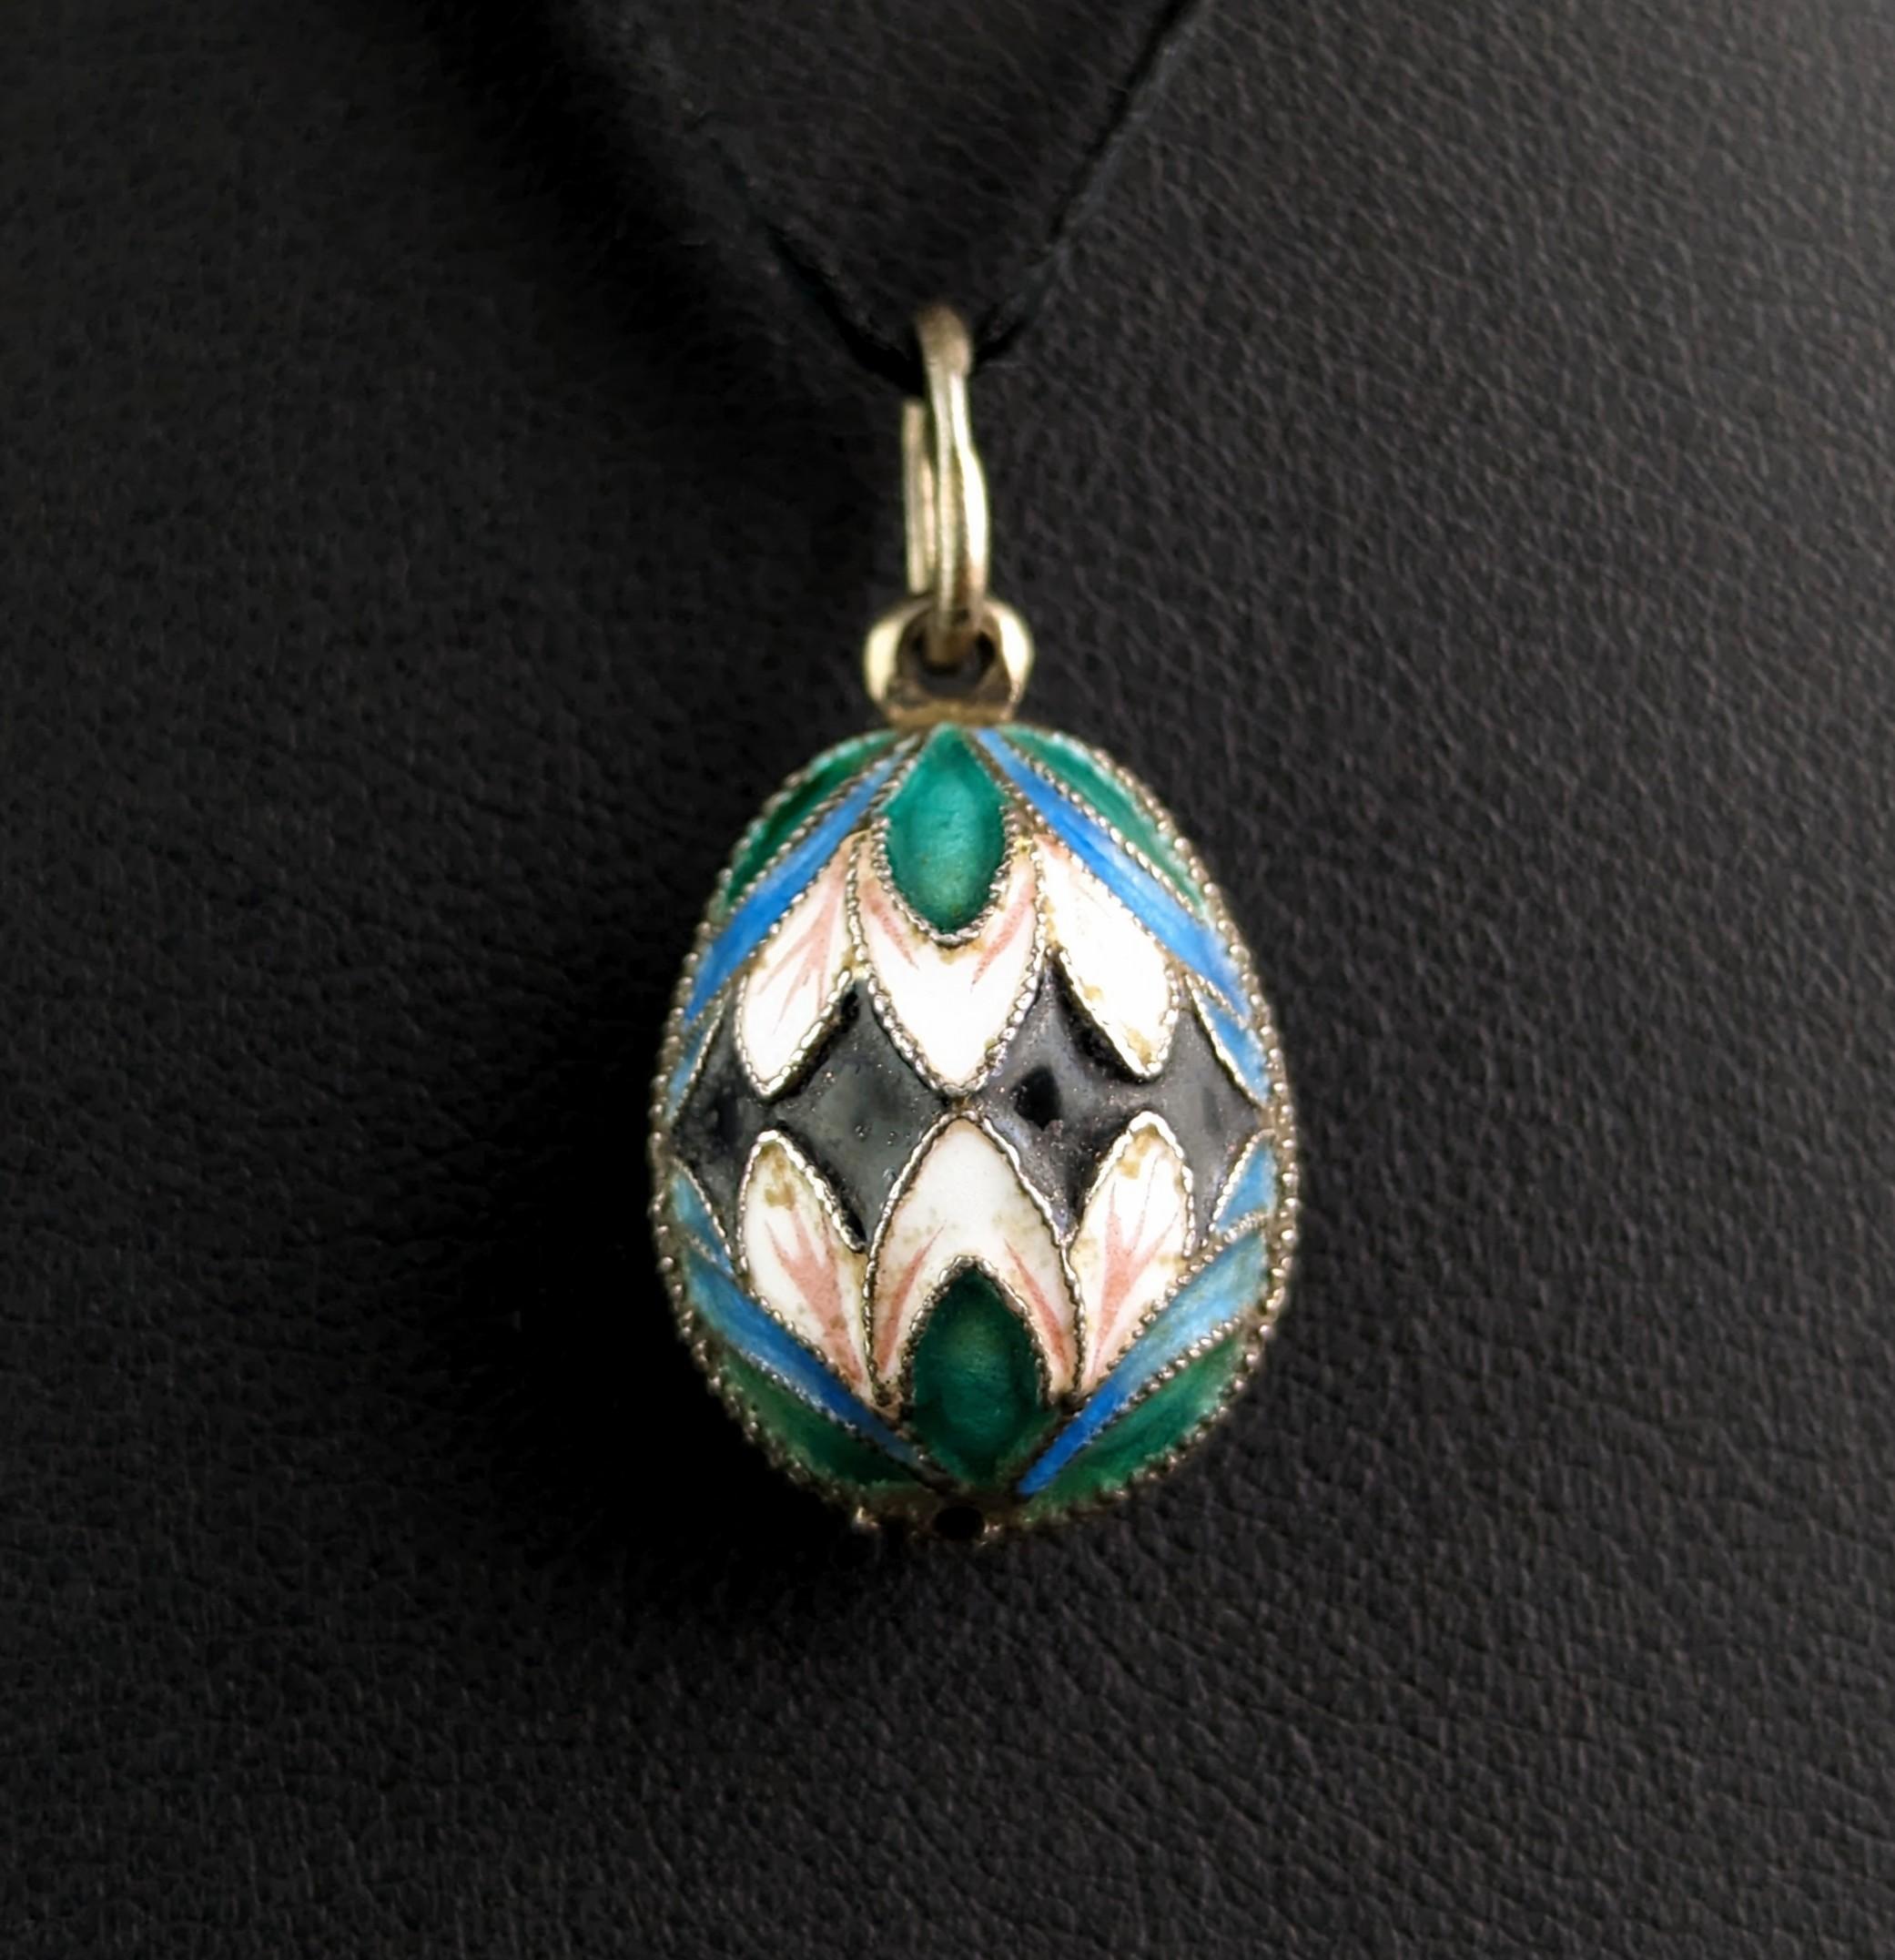 Always highly sought after are these sweet little Easter egg pendants.

Often presented as gifts at Easter time, this sweet little pendant is shaped like an egg, made from 950 silver and enamelled with fine cloisonne enamel in different shades of